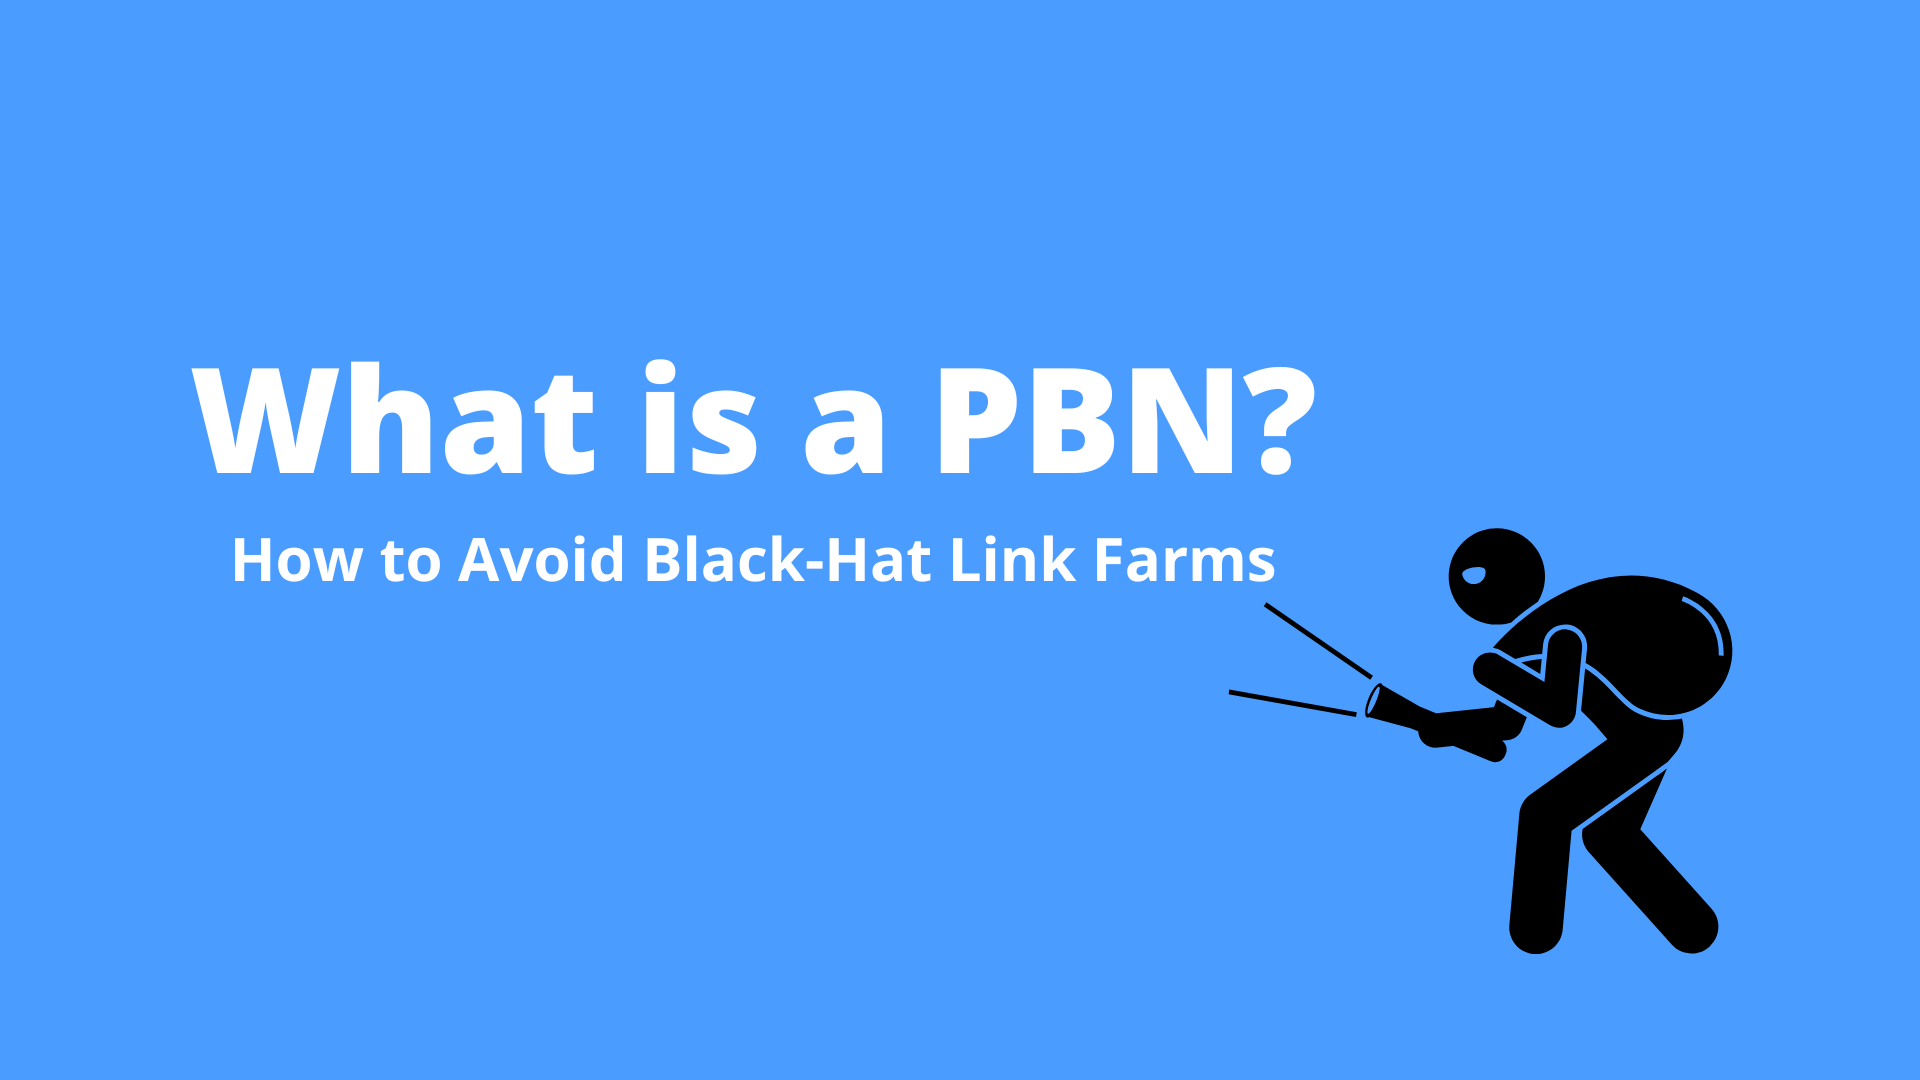 What is a PBN? How to Avoid Black-Hat Link Farms